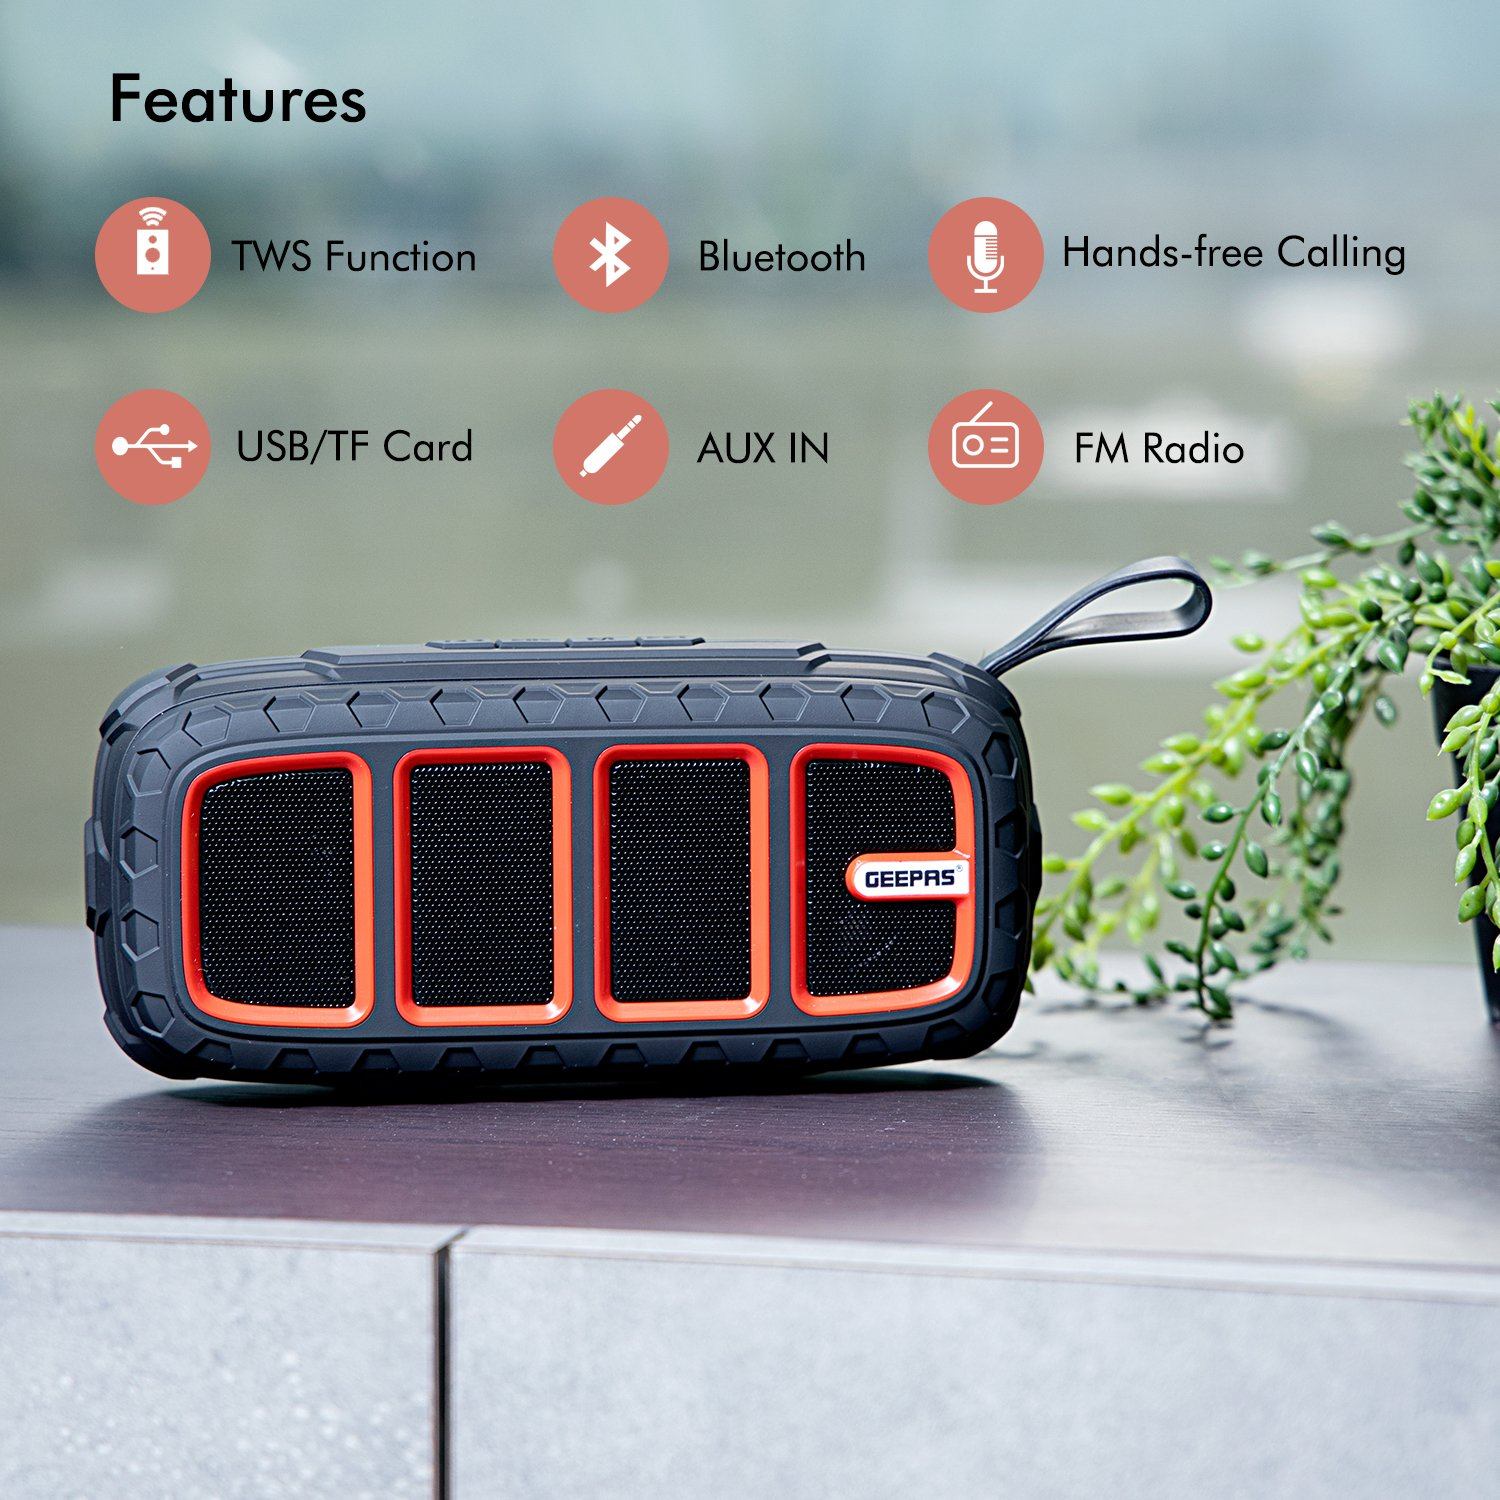 Portable Bluetooth Speaker Rechargeable MP3 Player USB/TF/AUX/FM/TWS Speakers Geepas | For you. For life. 